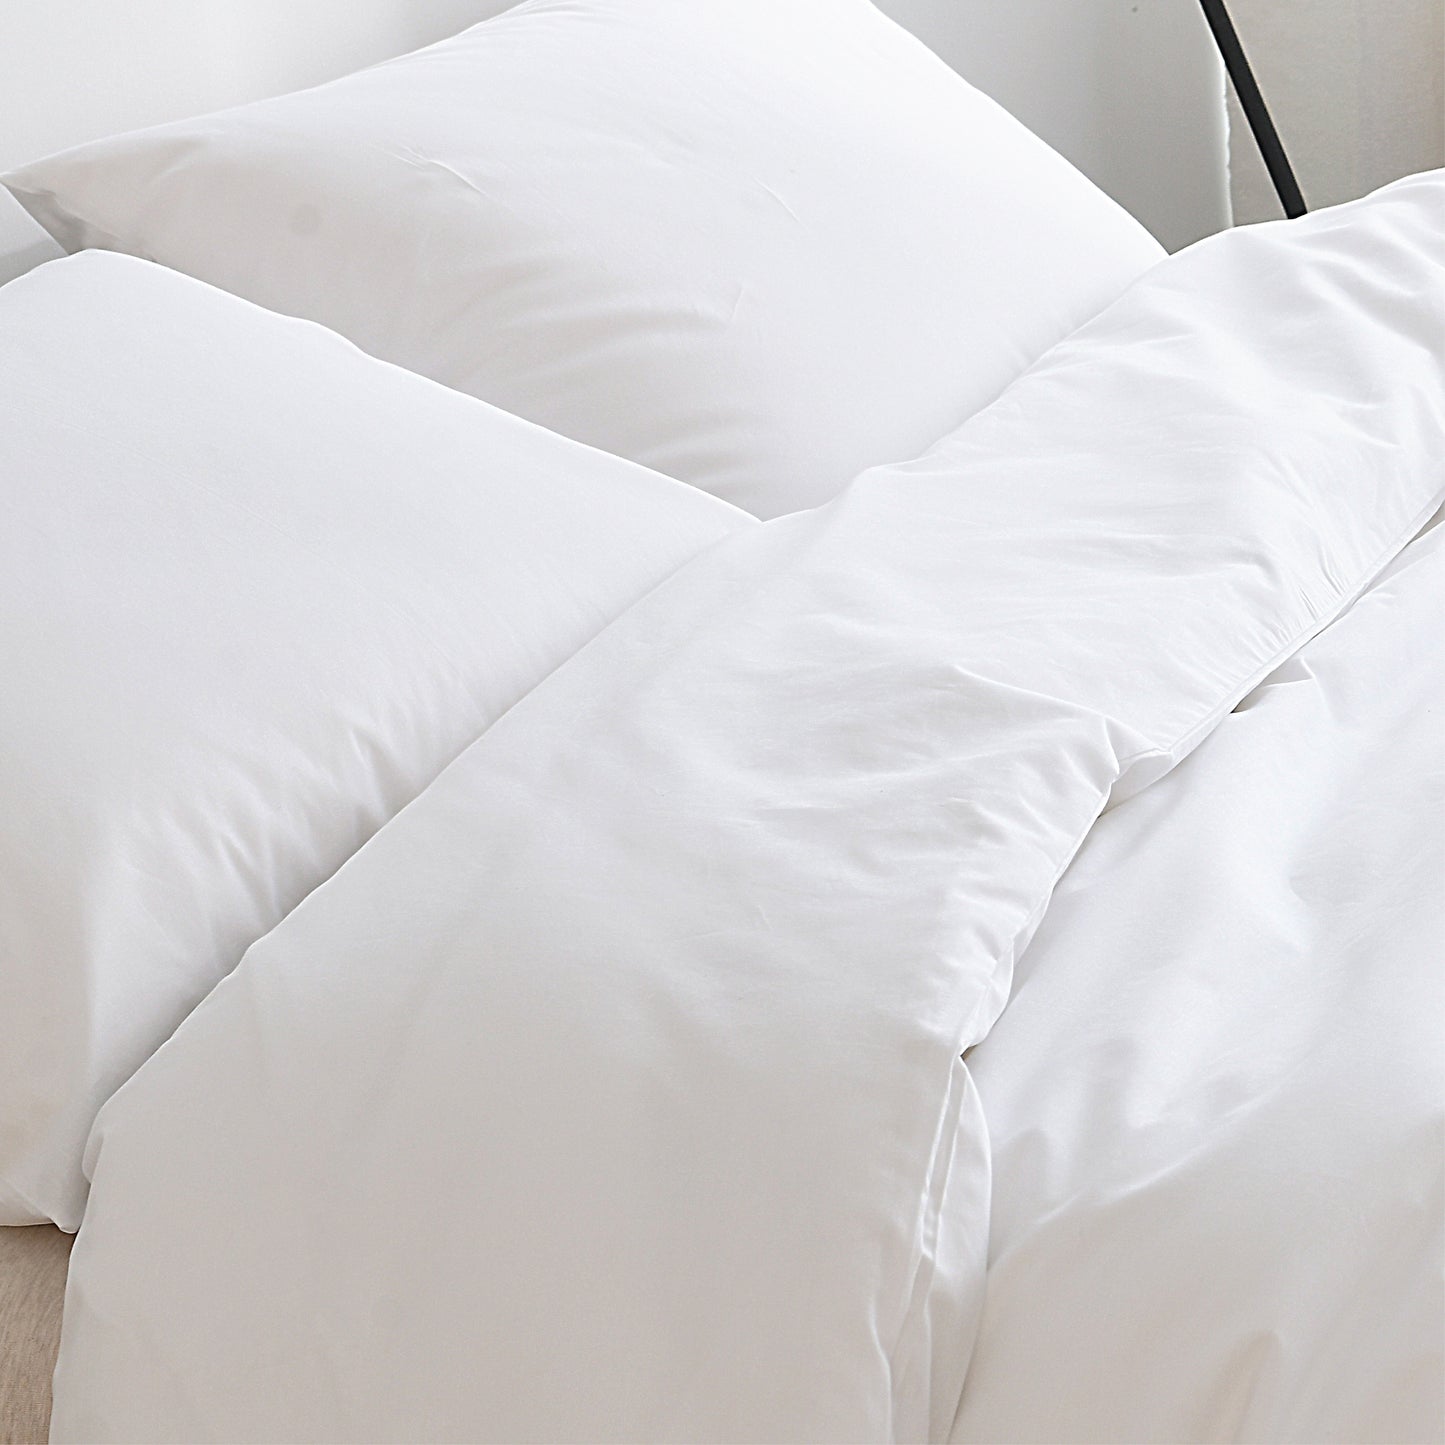 Jean Perry Hotel Series Signature White QUILT COVER ONLY - 100% Cotton 950TC